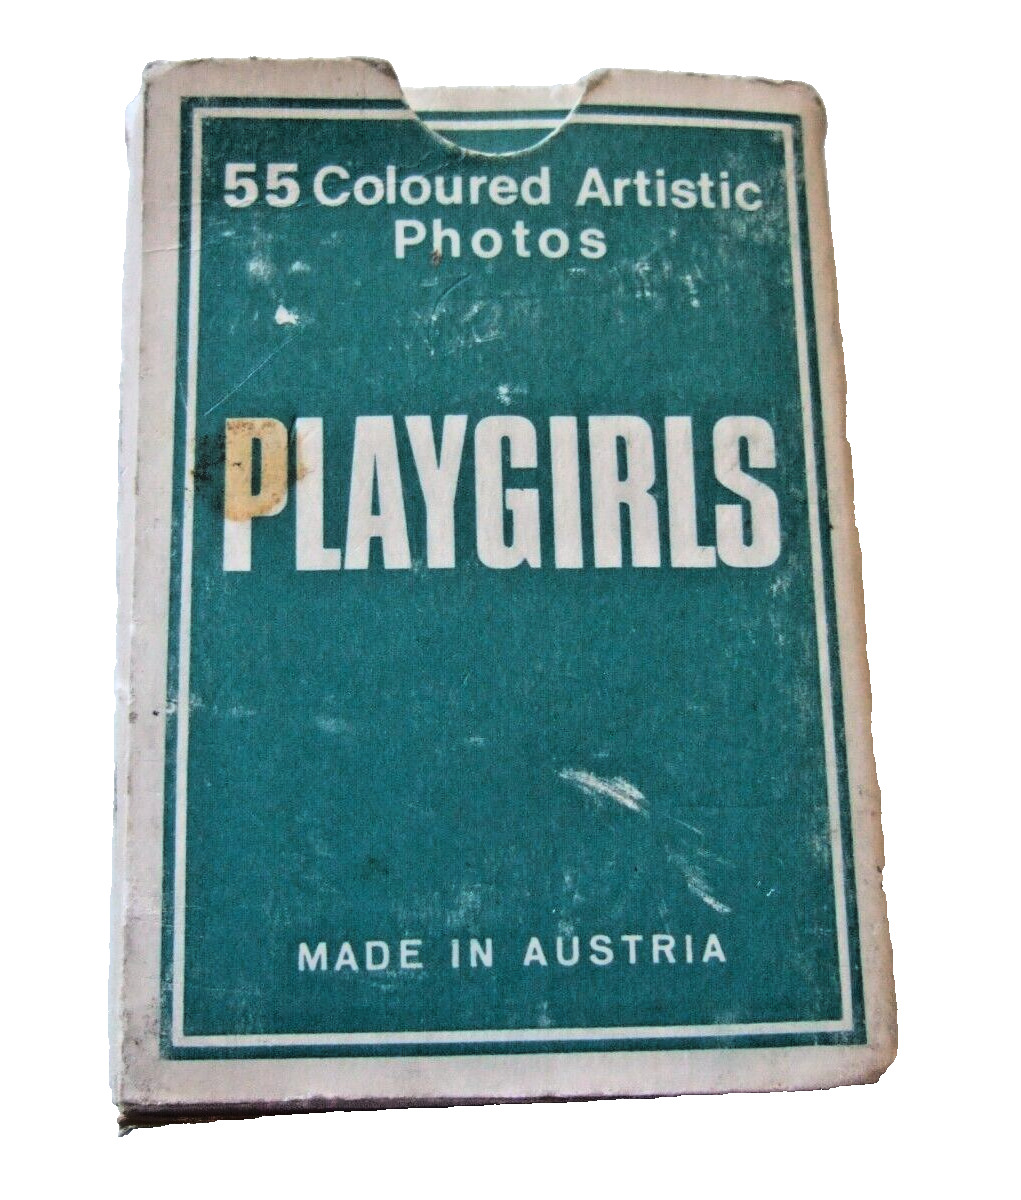 55 COLOURED ARTISTIC NUDE PHOTOS PLAYGIRLS PLAYING CARDS    No. 1004   AUSTRIA